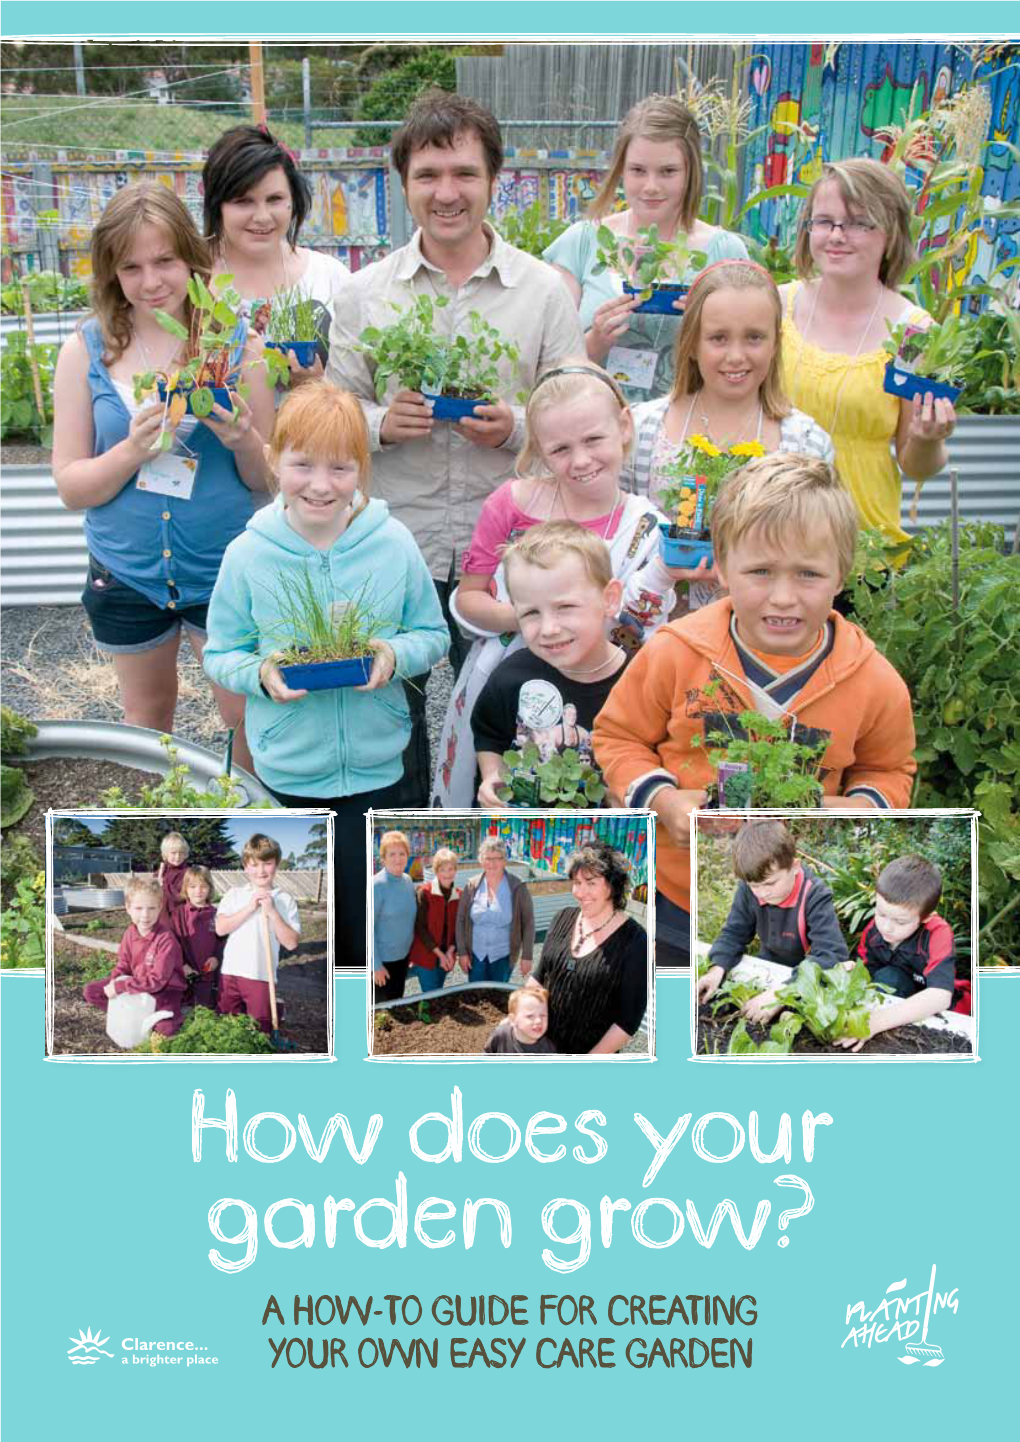 How Does Your Garden Grow? a HOW-TO GUIDE for CREATING YOUR OWN EASY CARE GARDEN Contents